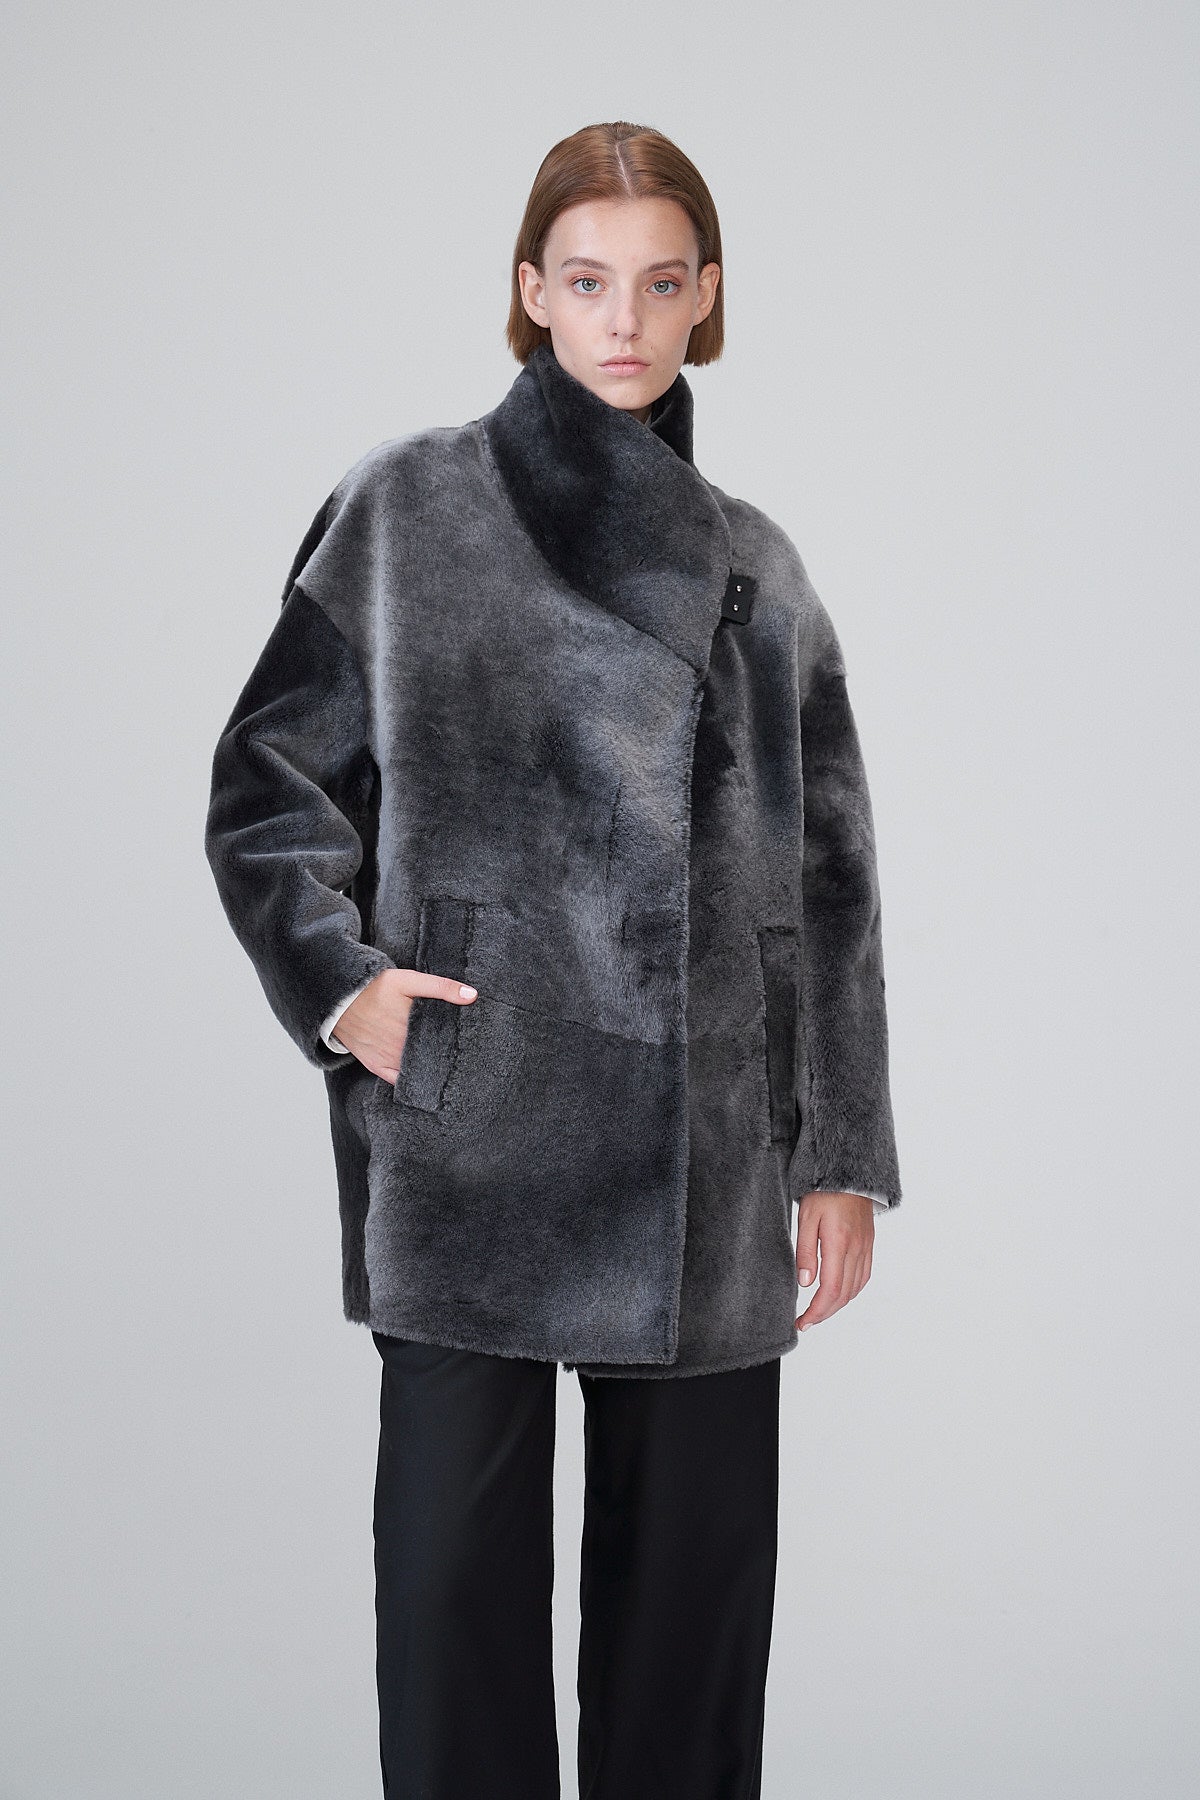 Timeless Leather & Shearling Jackets, Coats and Vests | VSP – Page 2 ...